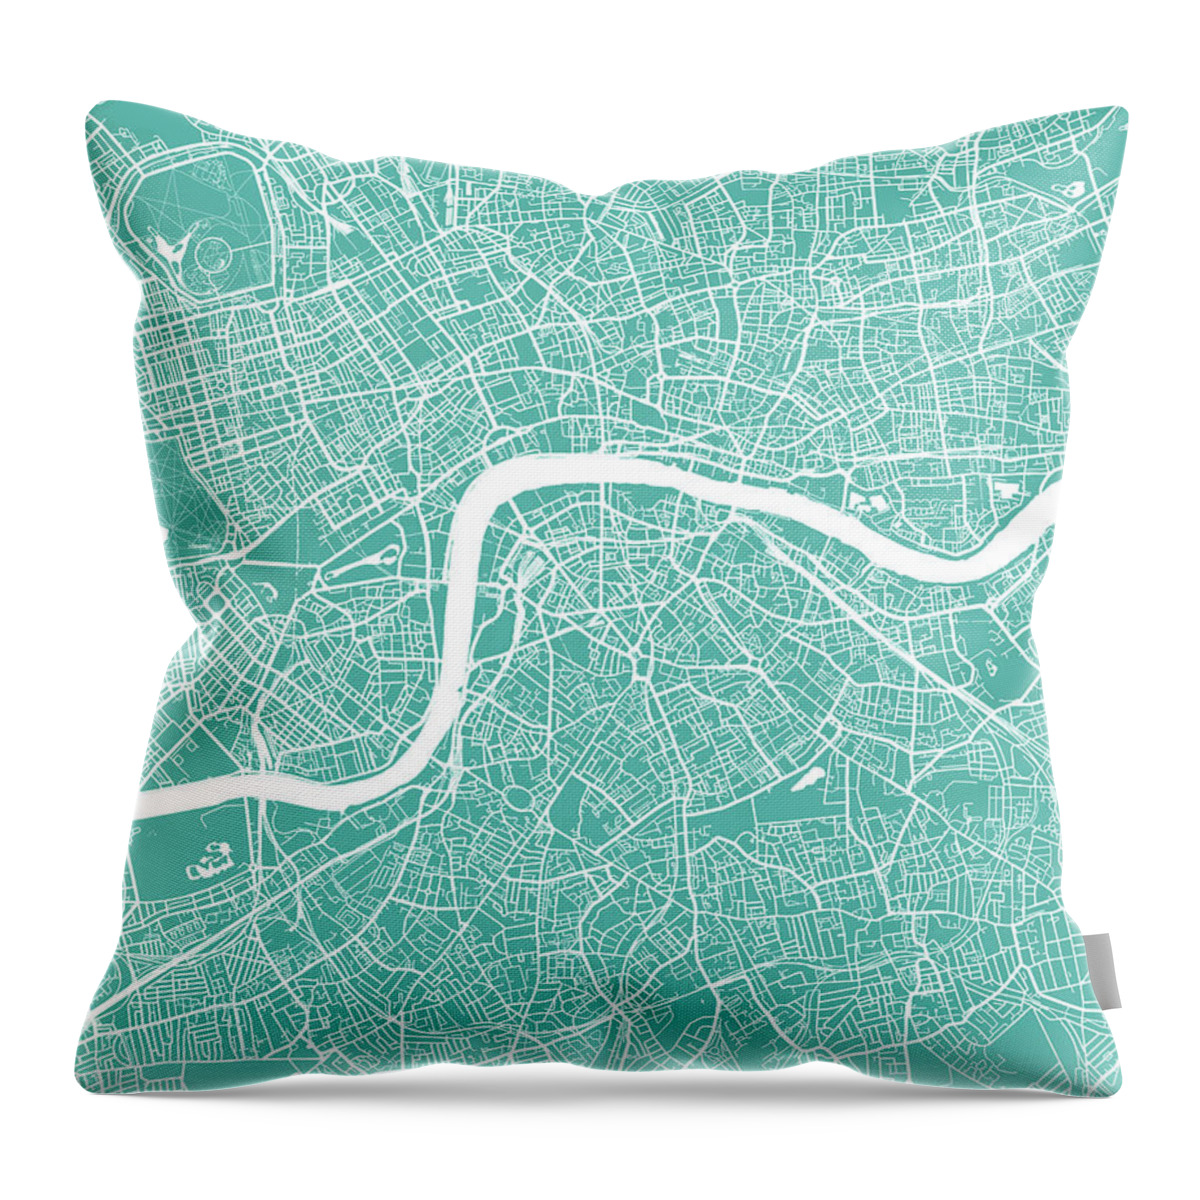 London Throw Pillow featuring the digital art London map teal by Delphimages Map Creations